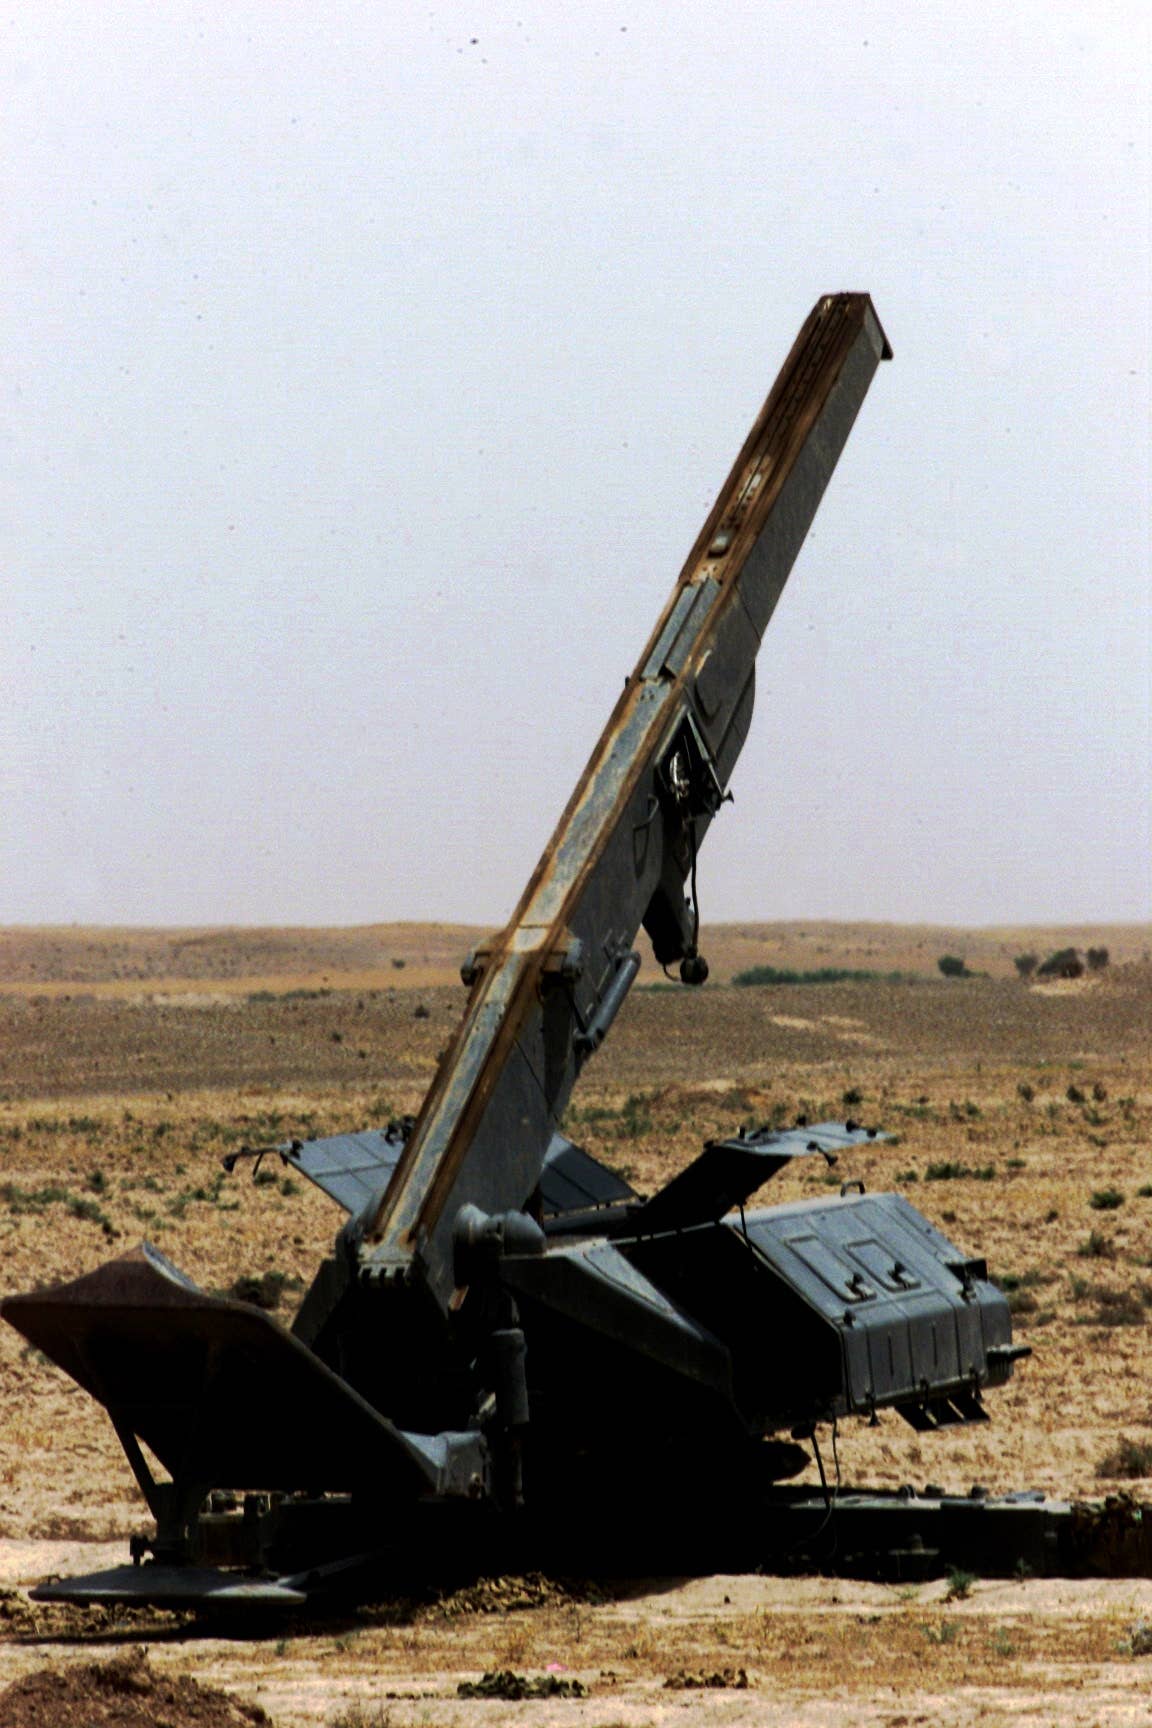 An Iraqi SA-2 Guideline surface-to-air missile launcher in Iraq in 2003. <em>Jacob H. Smith/U.S. Army</em>